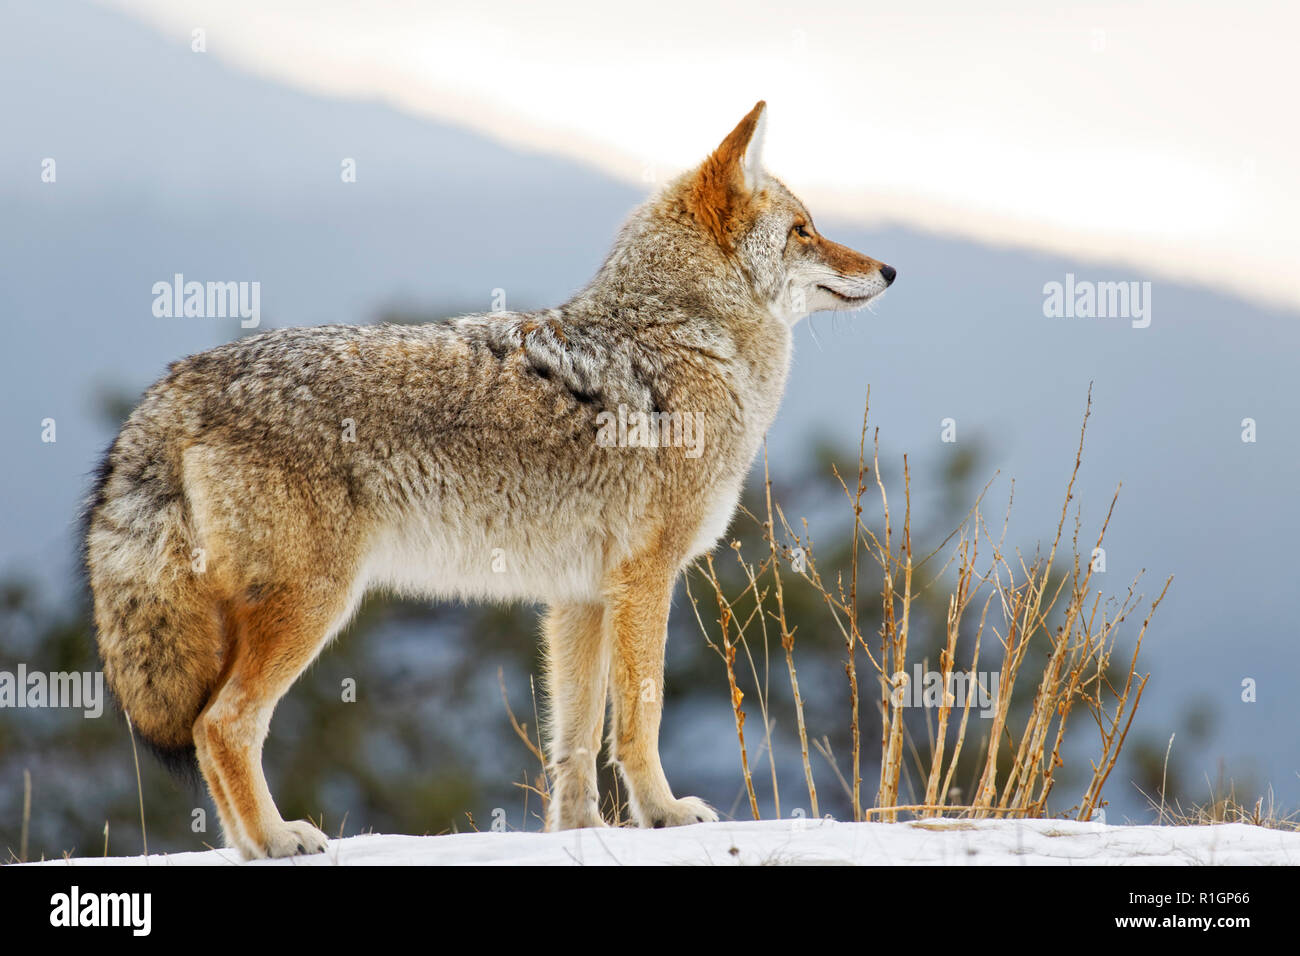 42,757.09750 close up of a Coyote standing broadside right & looking forward on a snowy hilltop, conifer tree and hazy mountain background Stock Photo